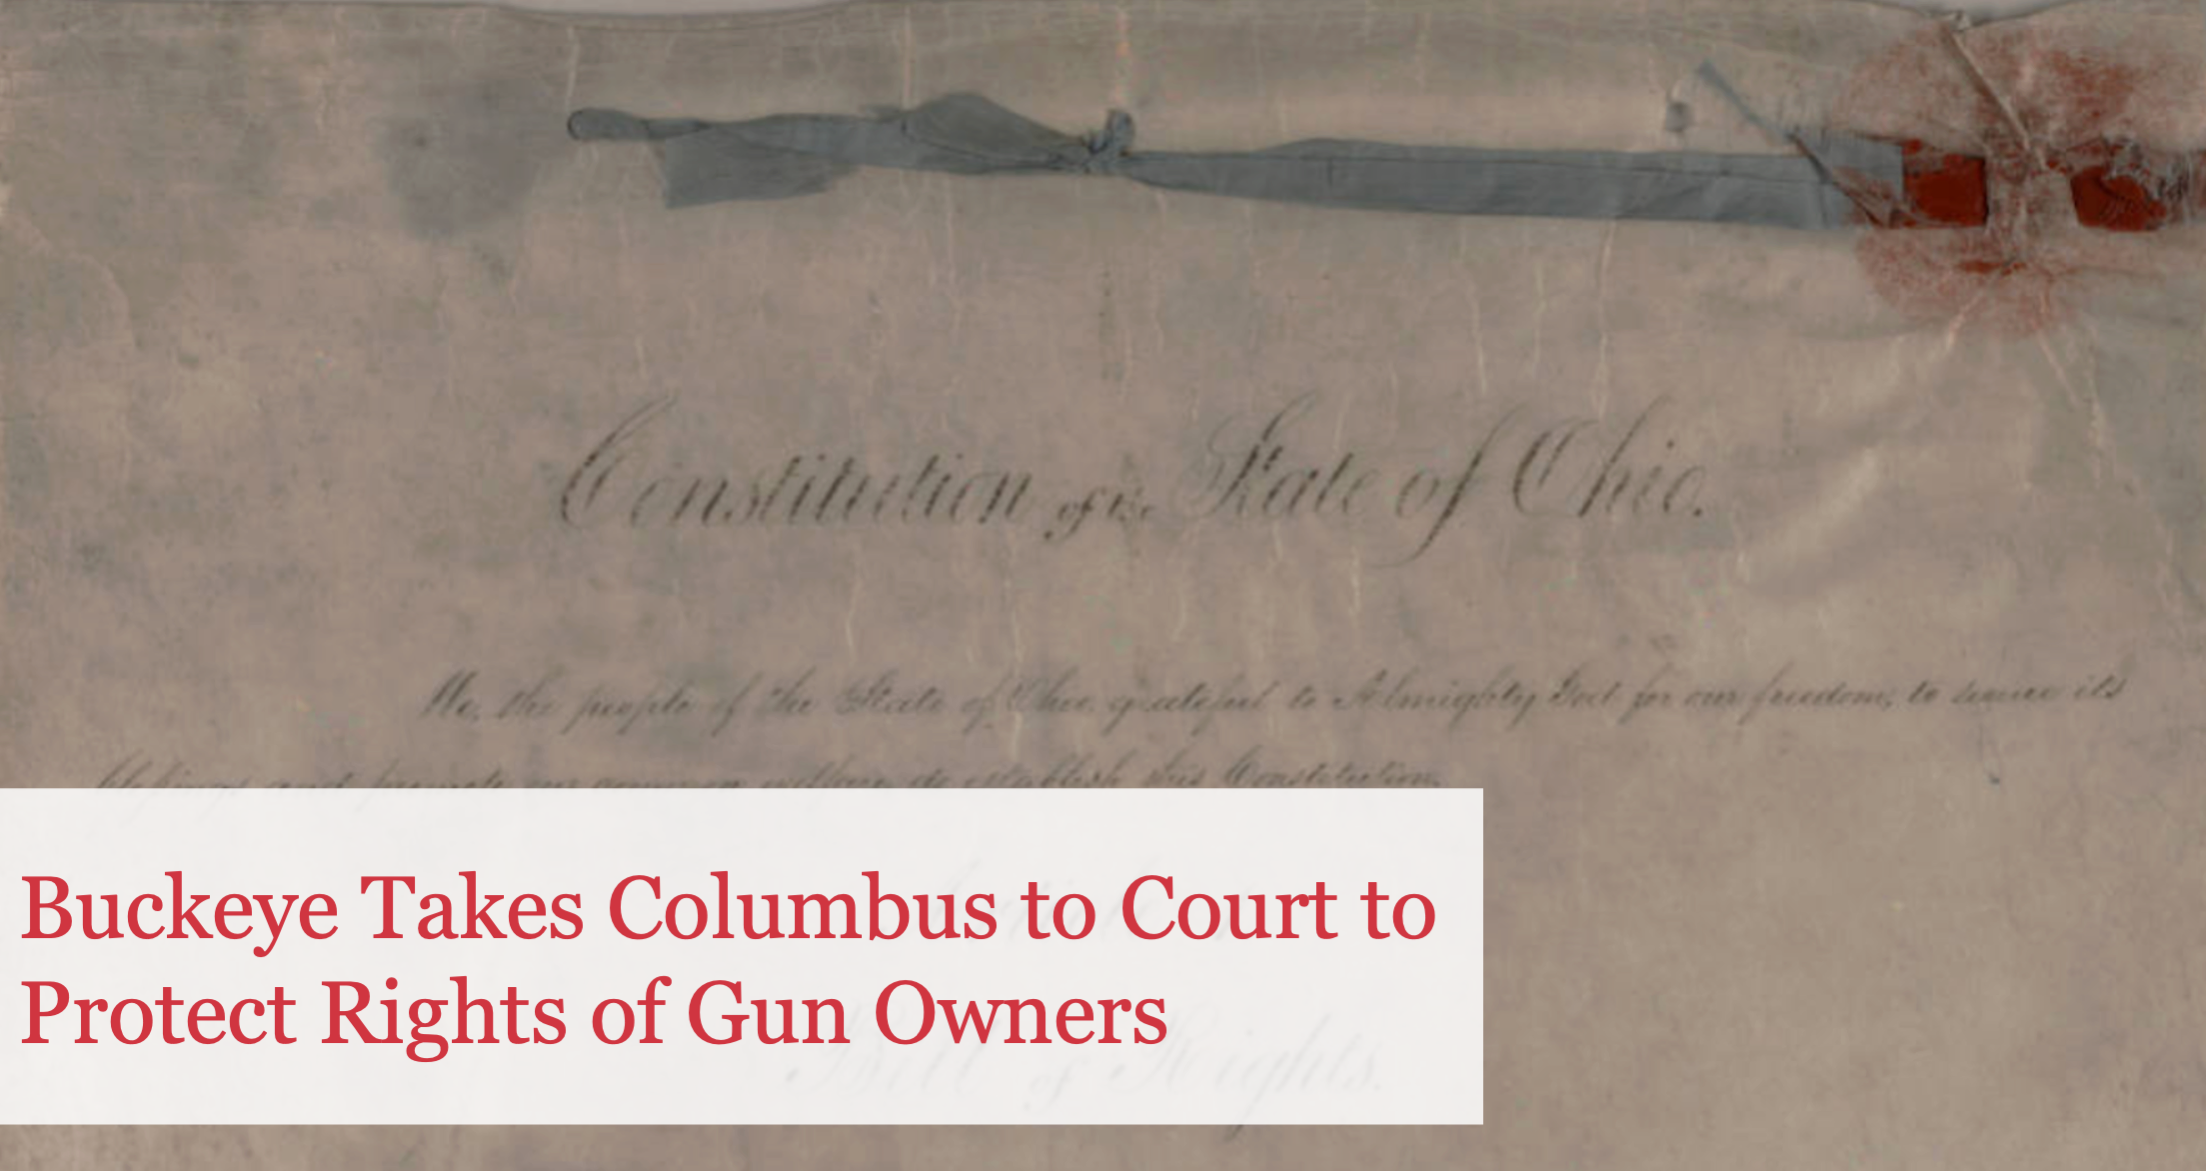 The Buckeye Institute Goes to Court to Protect Constitutional Rights of Gun Owners